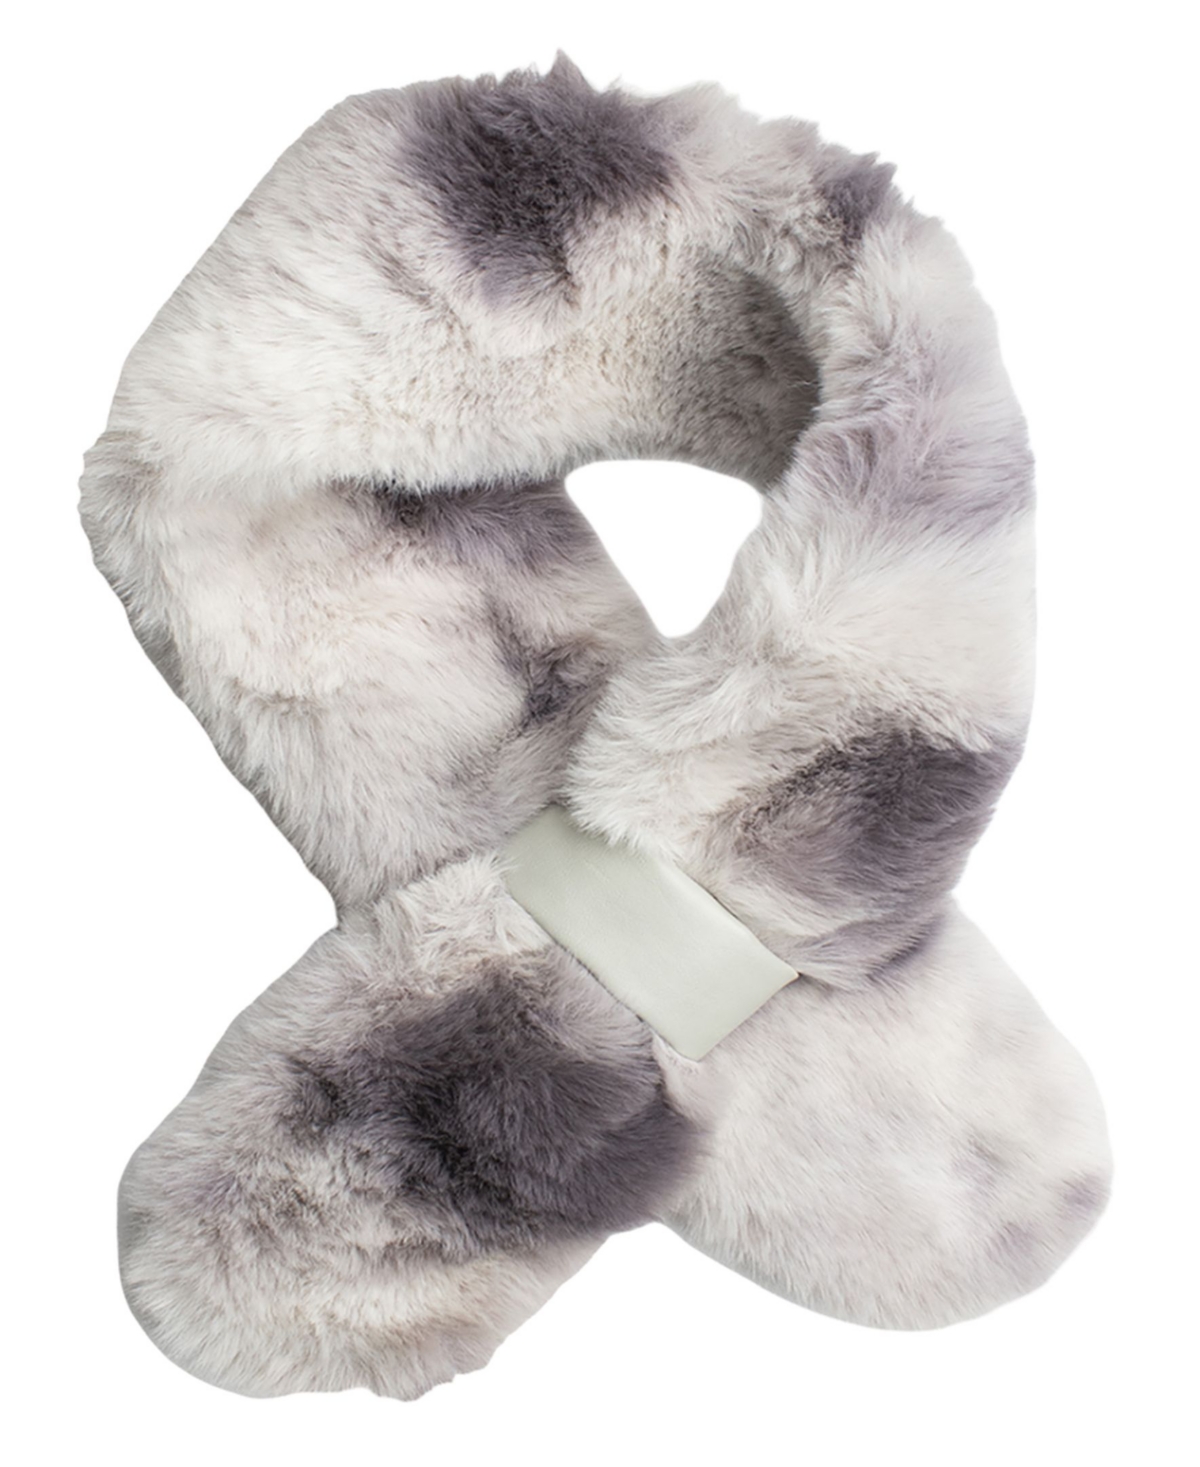 Marcus Adler Women's Ombre Faux Fur Pull Through Scarf